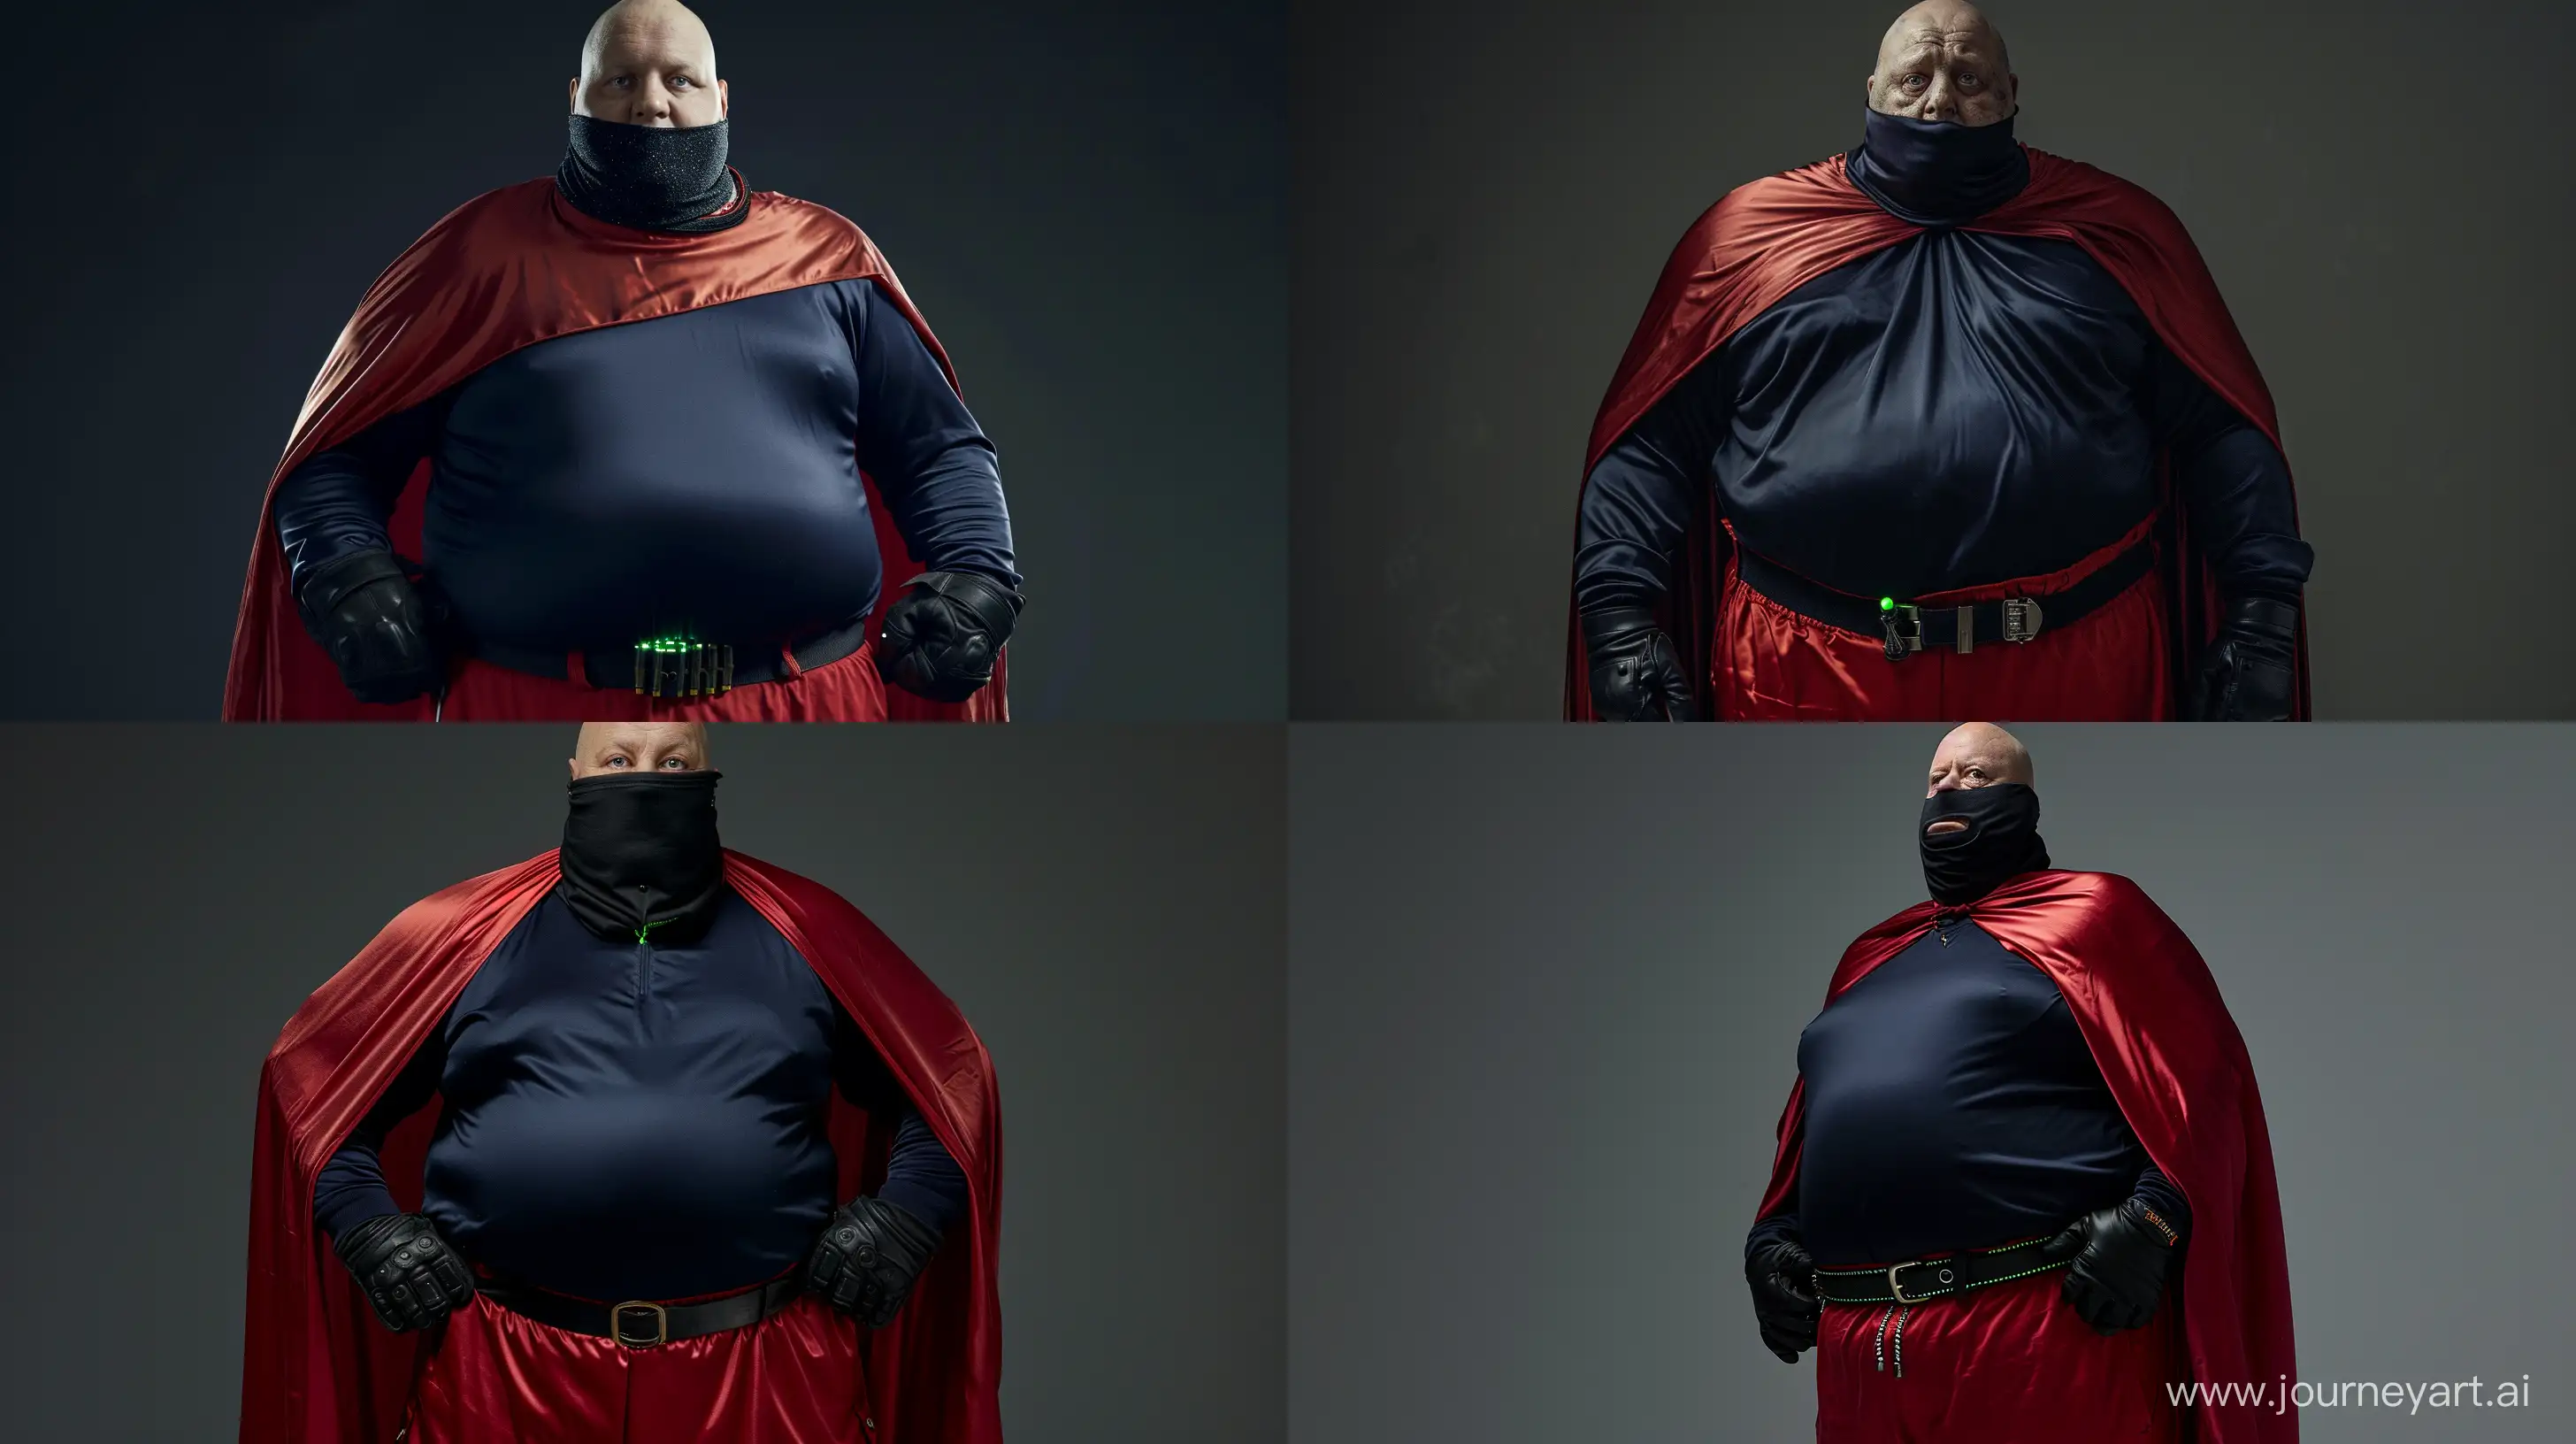 Elderly-Superhero-in-Stylish-Red-Tracksuit-and-Cape